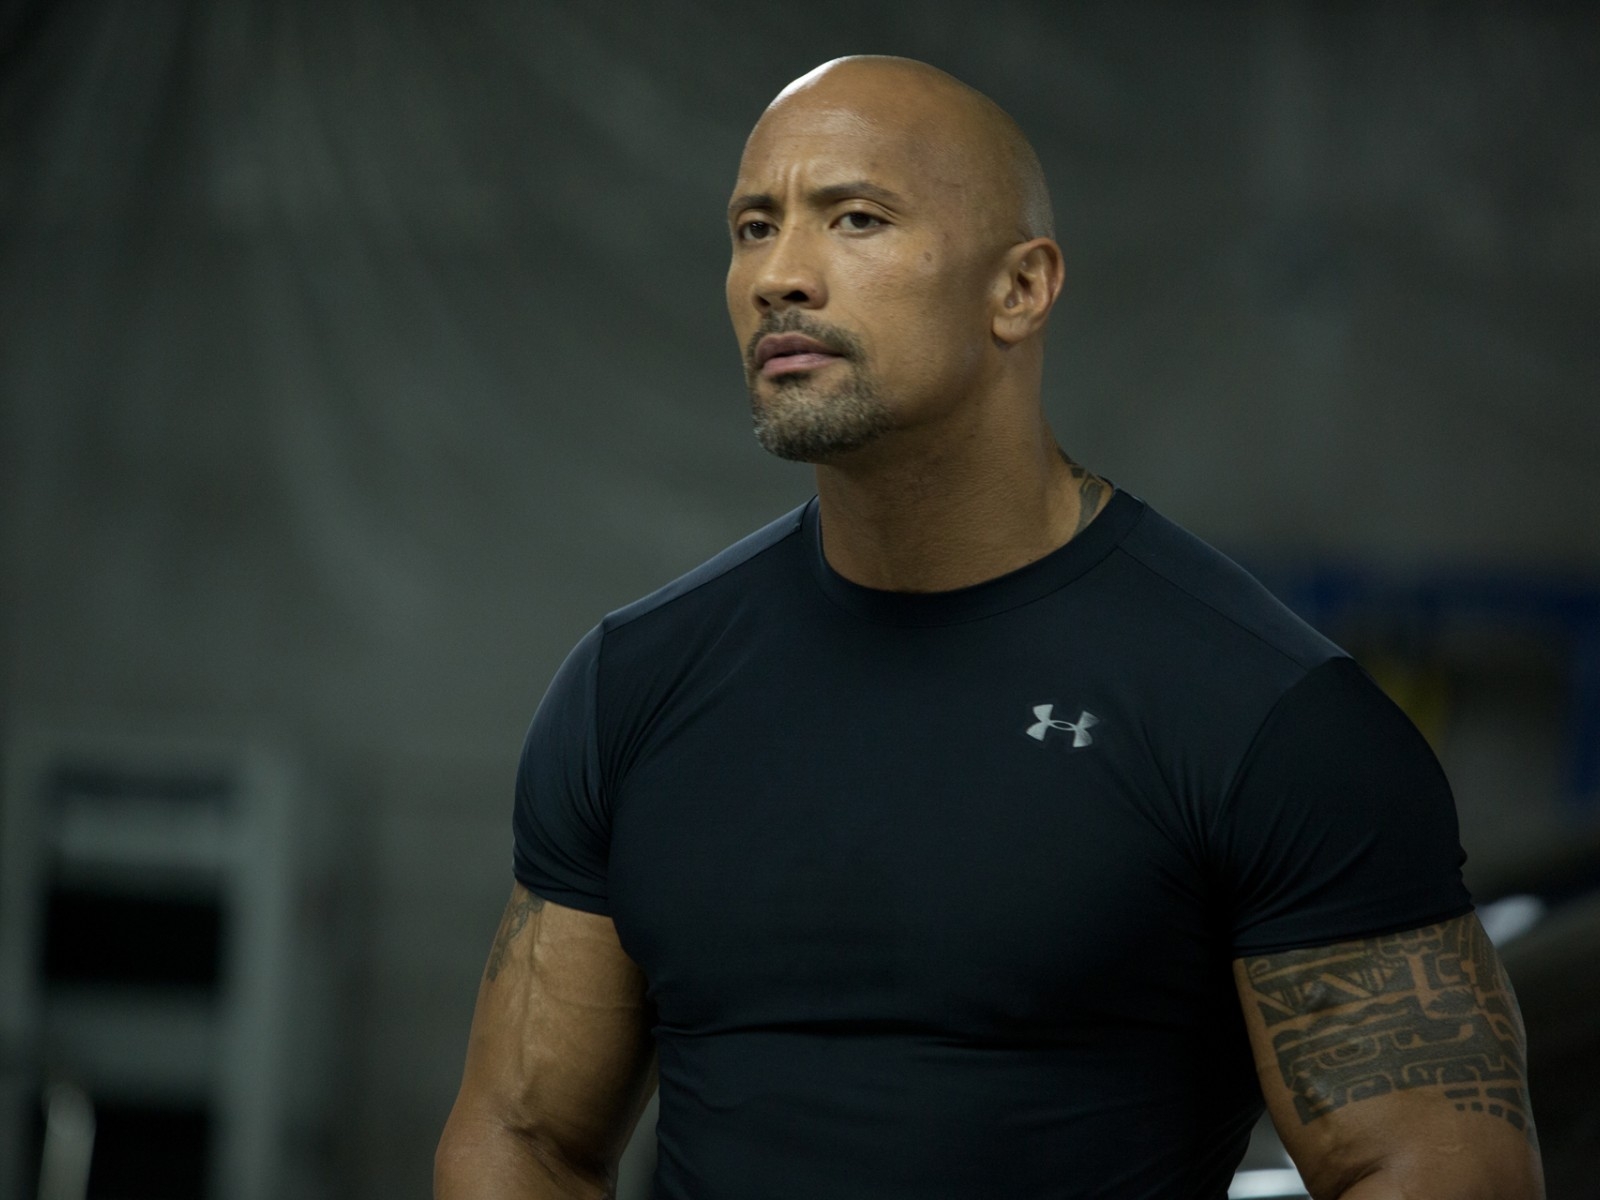 Dwayne Johnson Fast and Furious 6 for 1600 x 1200 resolution